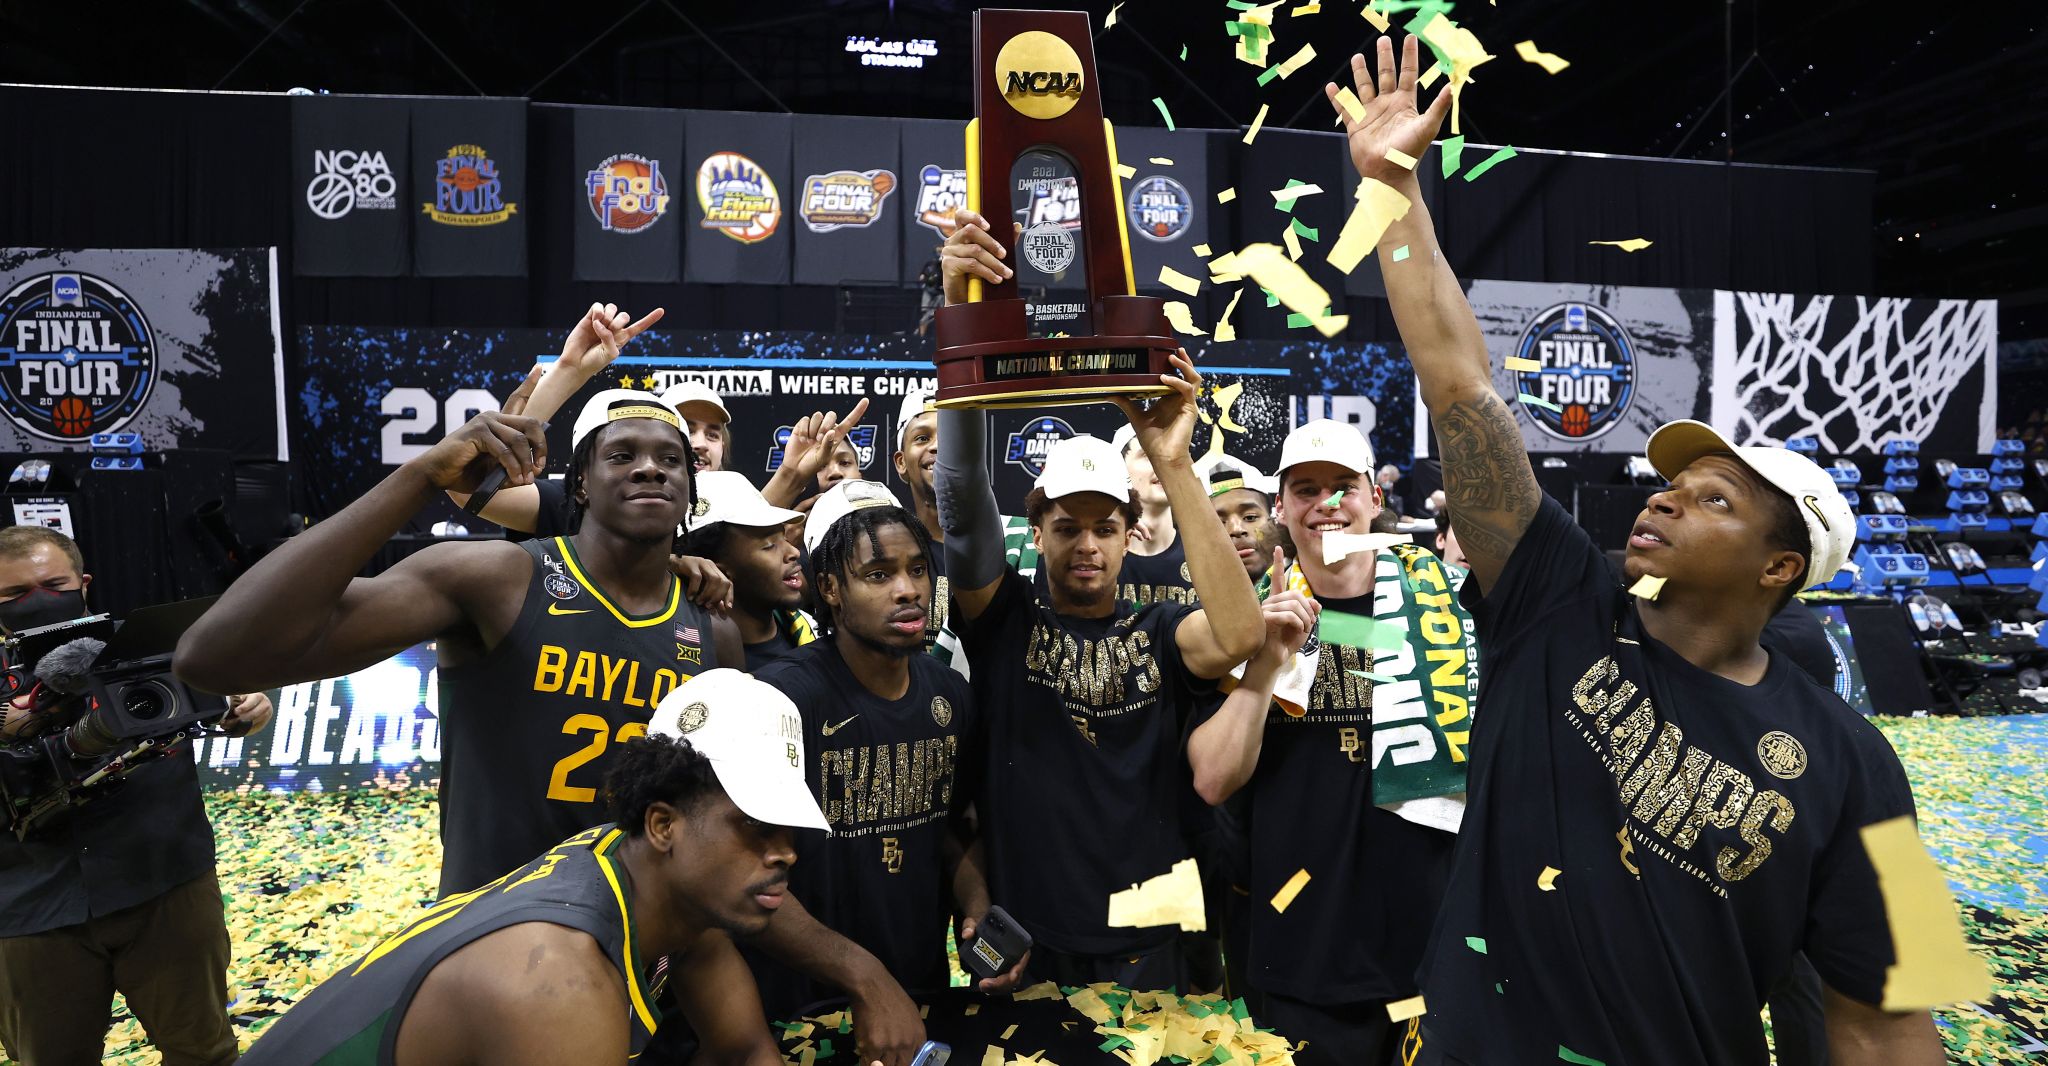 Baylor men's basketball wins first national title and state's second